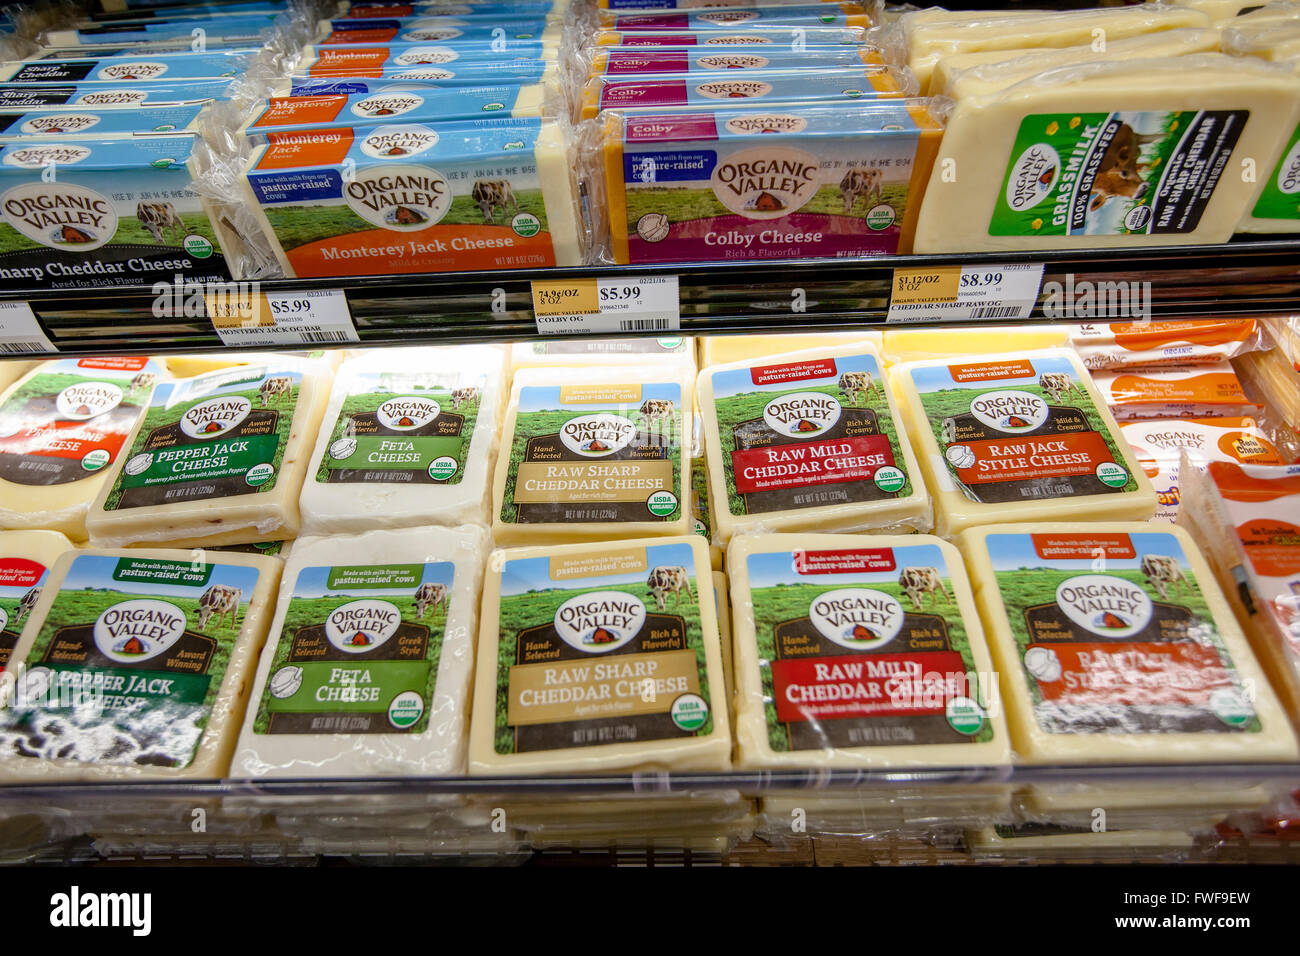 Organic Valley brand cheese in a grocery store refrigeration case Stock Photo